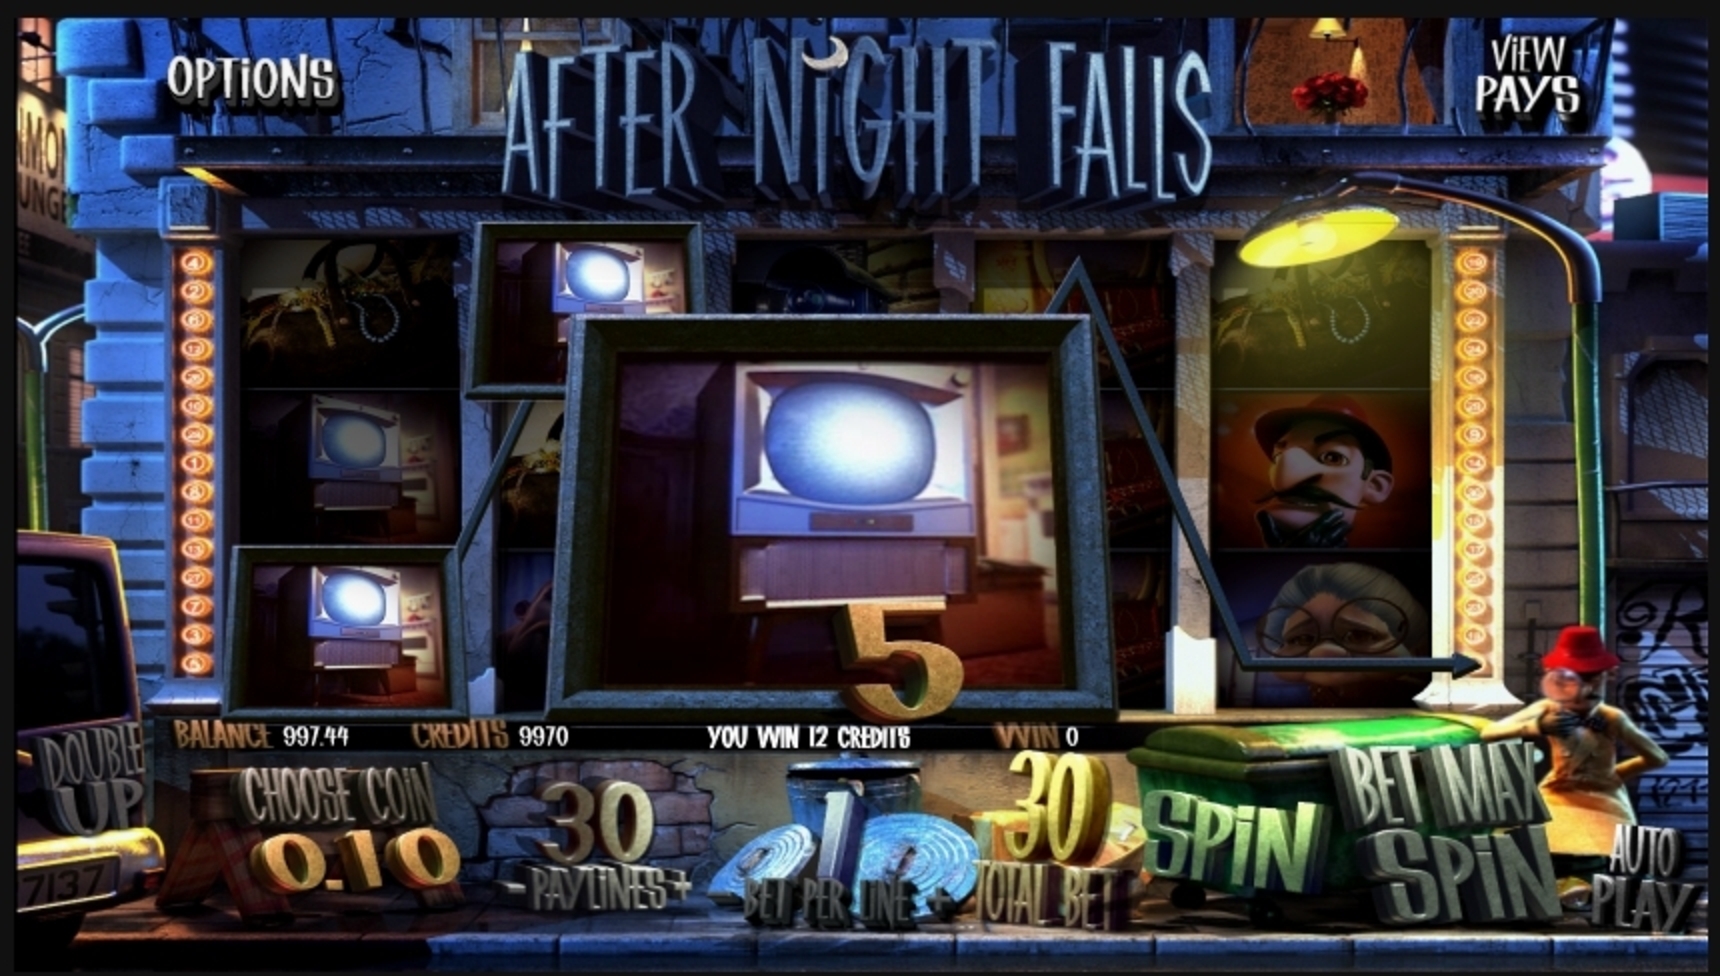 Win Money in After Night Falls Free Slot Game by Betsoft